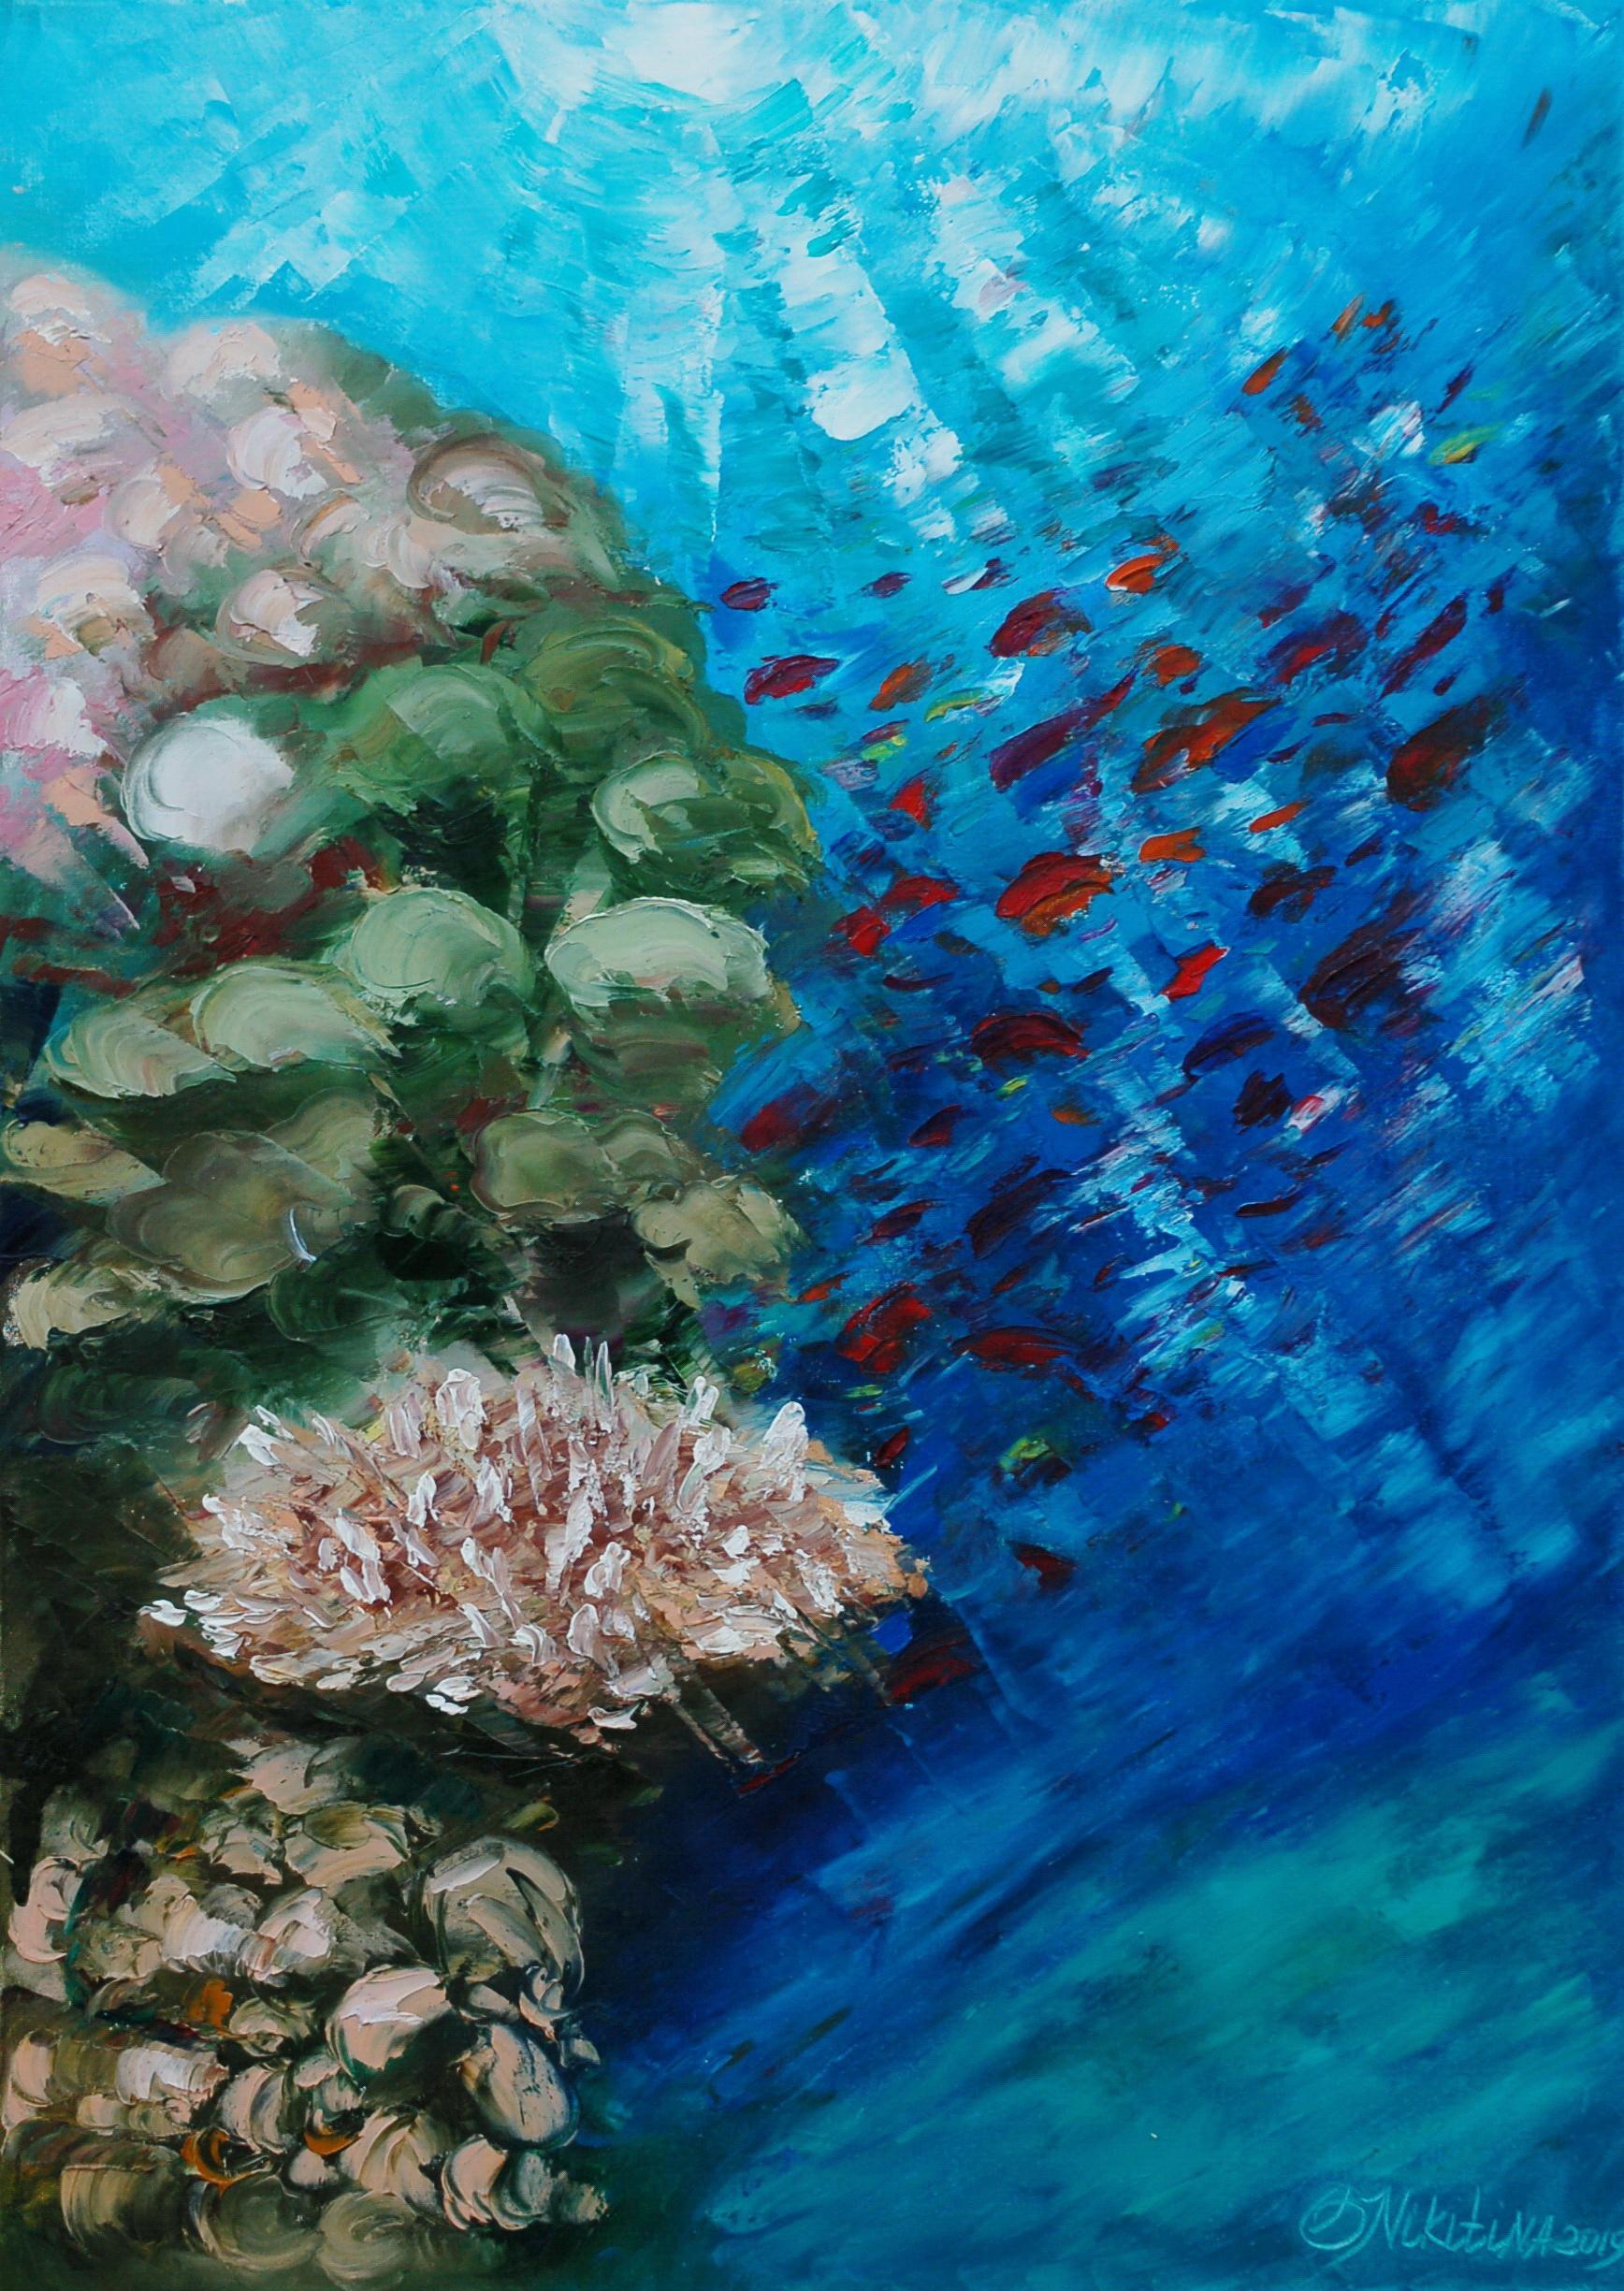 Tropical Coral Reef Underwater painting was made underwater at the depth of 8 m